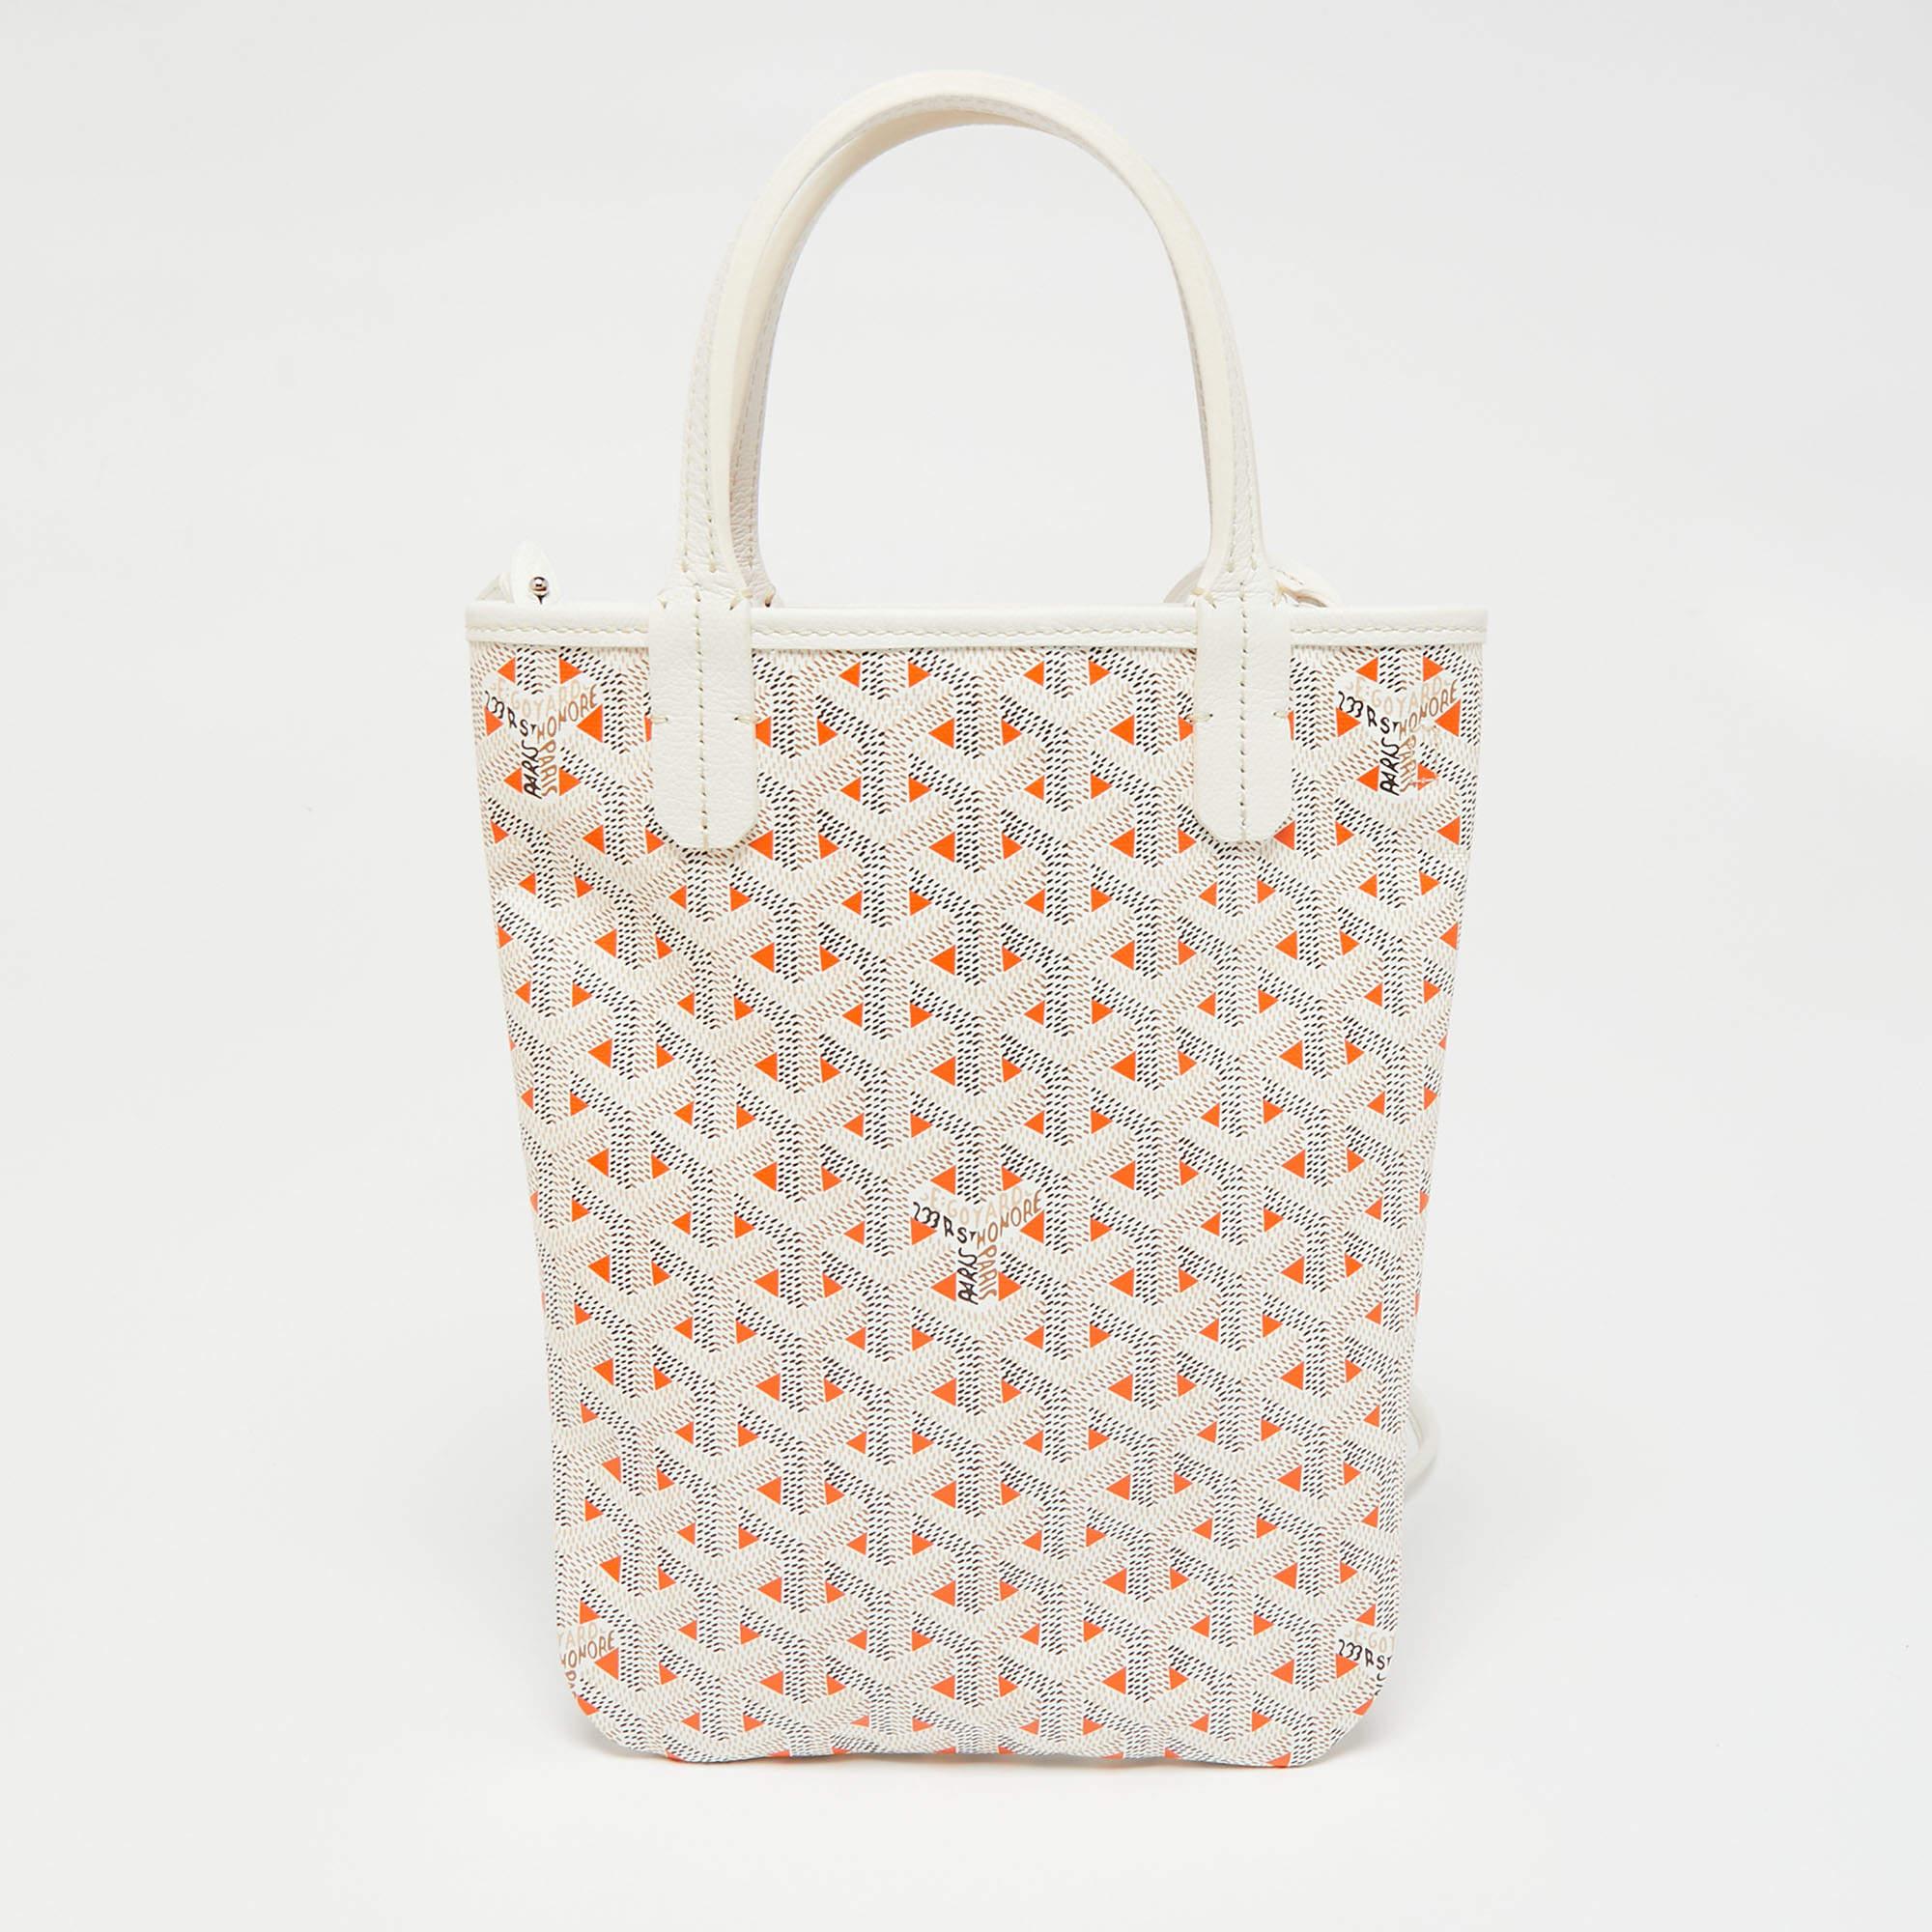 The unique aesthetics of the creations from Goyard set them apart and make them a valuable addition to your closet. This Poitiers Claire Voie tote is enriched with functional details and an exciting silhouette. Created from the signature Goyardine